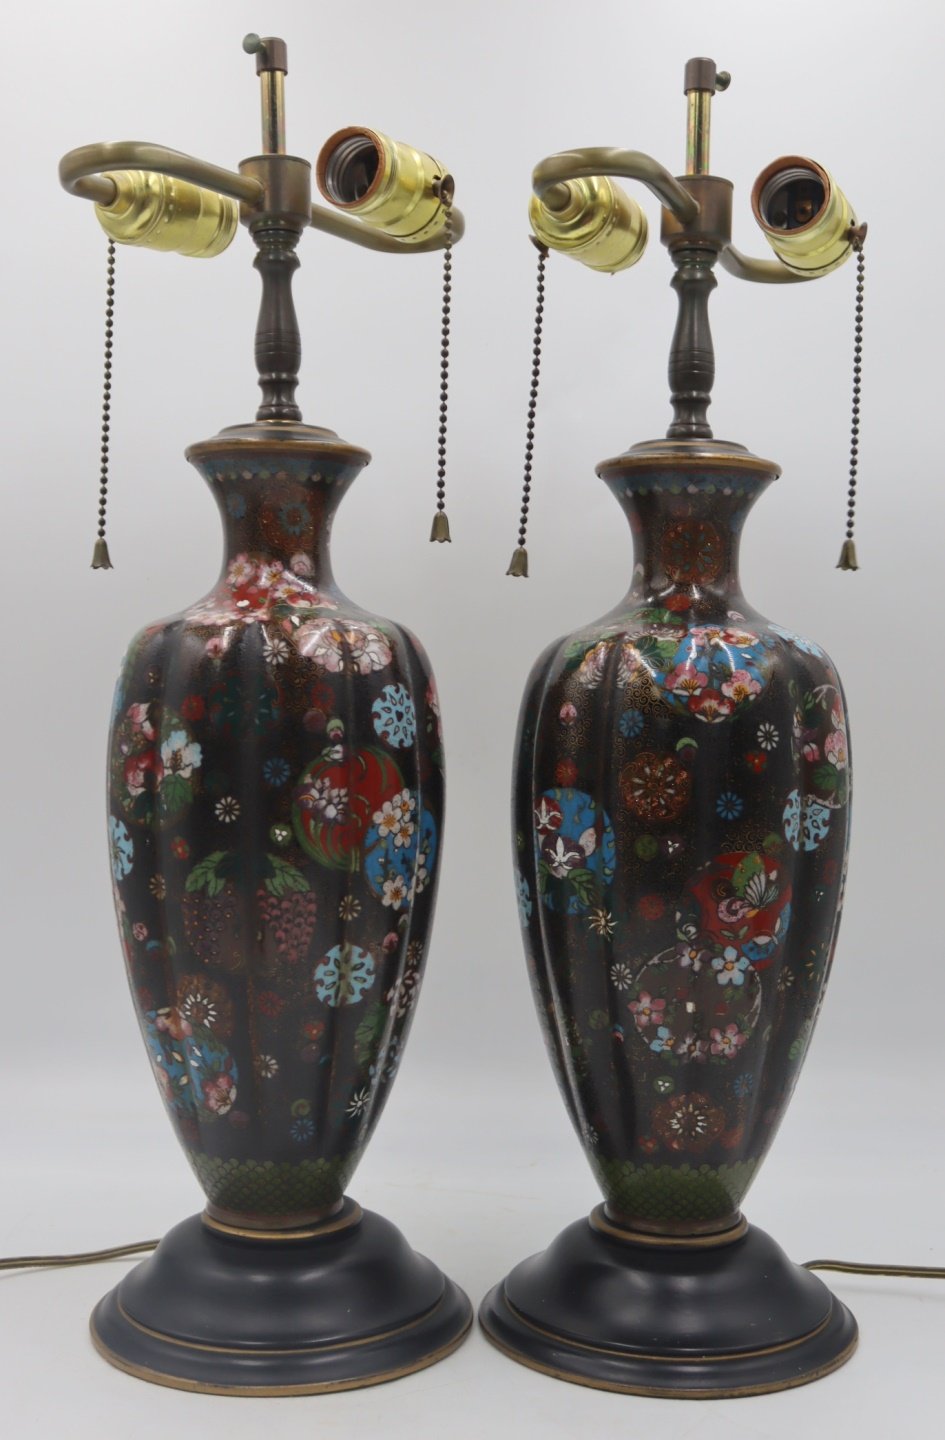 PAIR OF LOBED CLOISONNE VASES MOUNTED 30b858